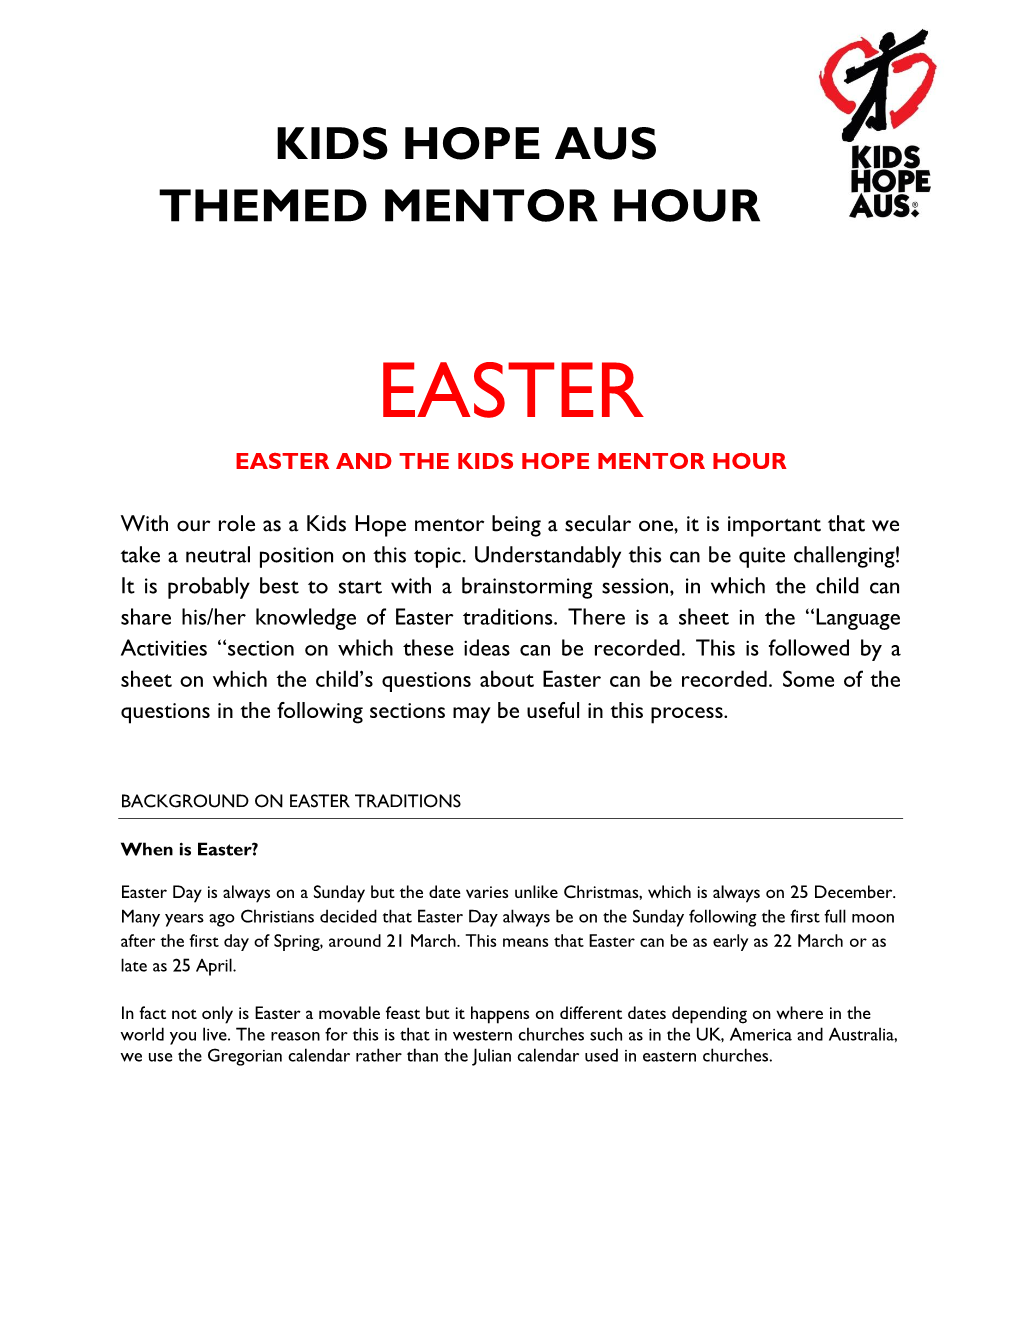 Easter Easter and the Kids Hope Mentor Hour